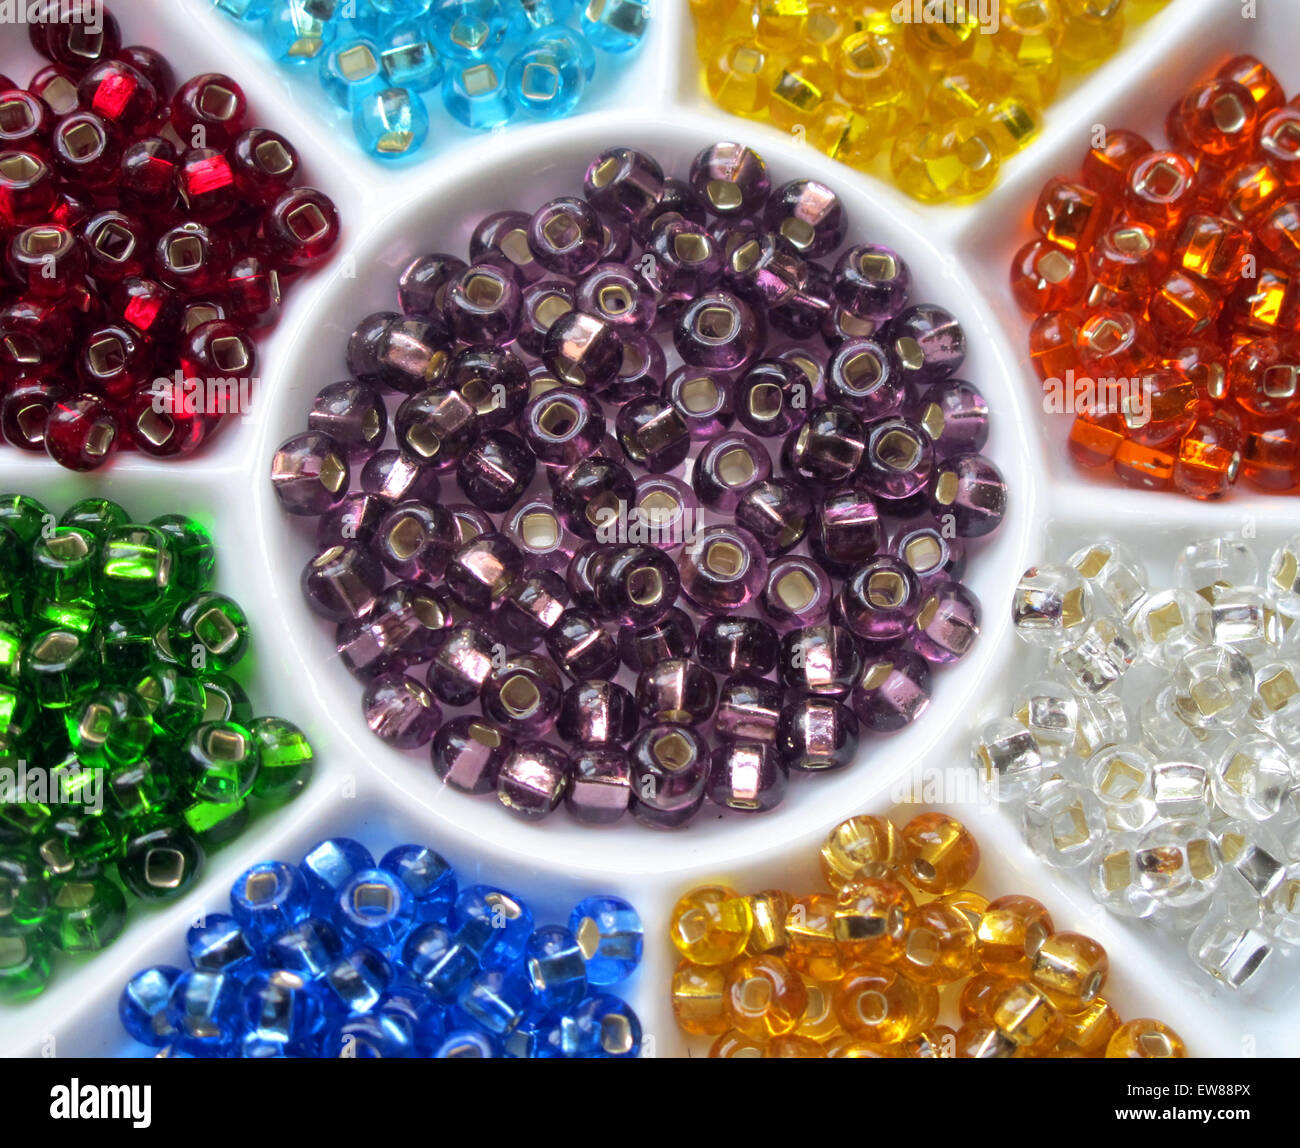 Colorful glass beads in a ceramic bead sorter Stock Photo - Alamy